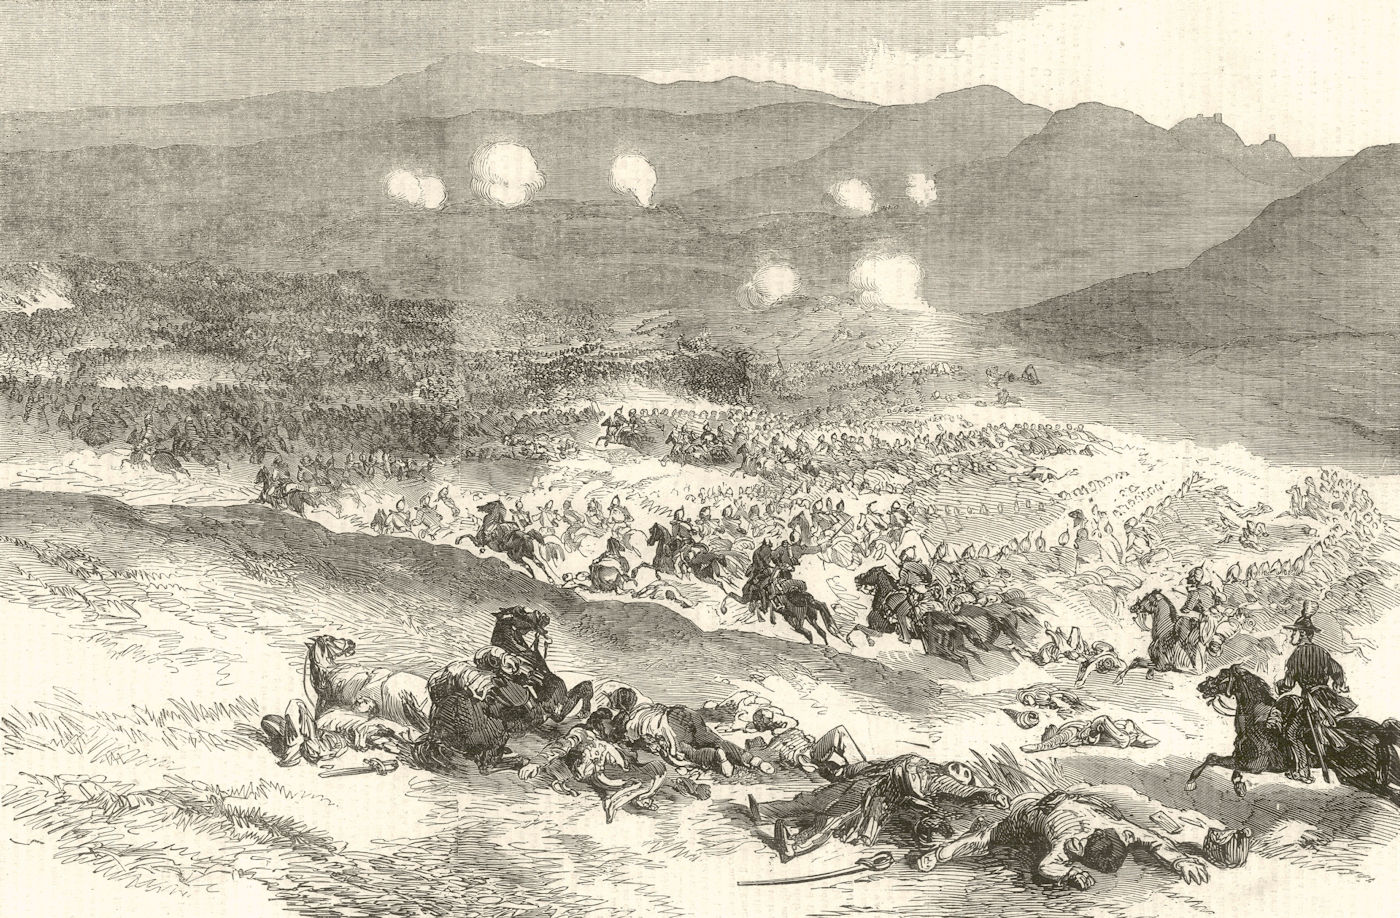 Action at Balaklava, October 25. 1st charge of Heavy Cavalry. Crimean War 1854